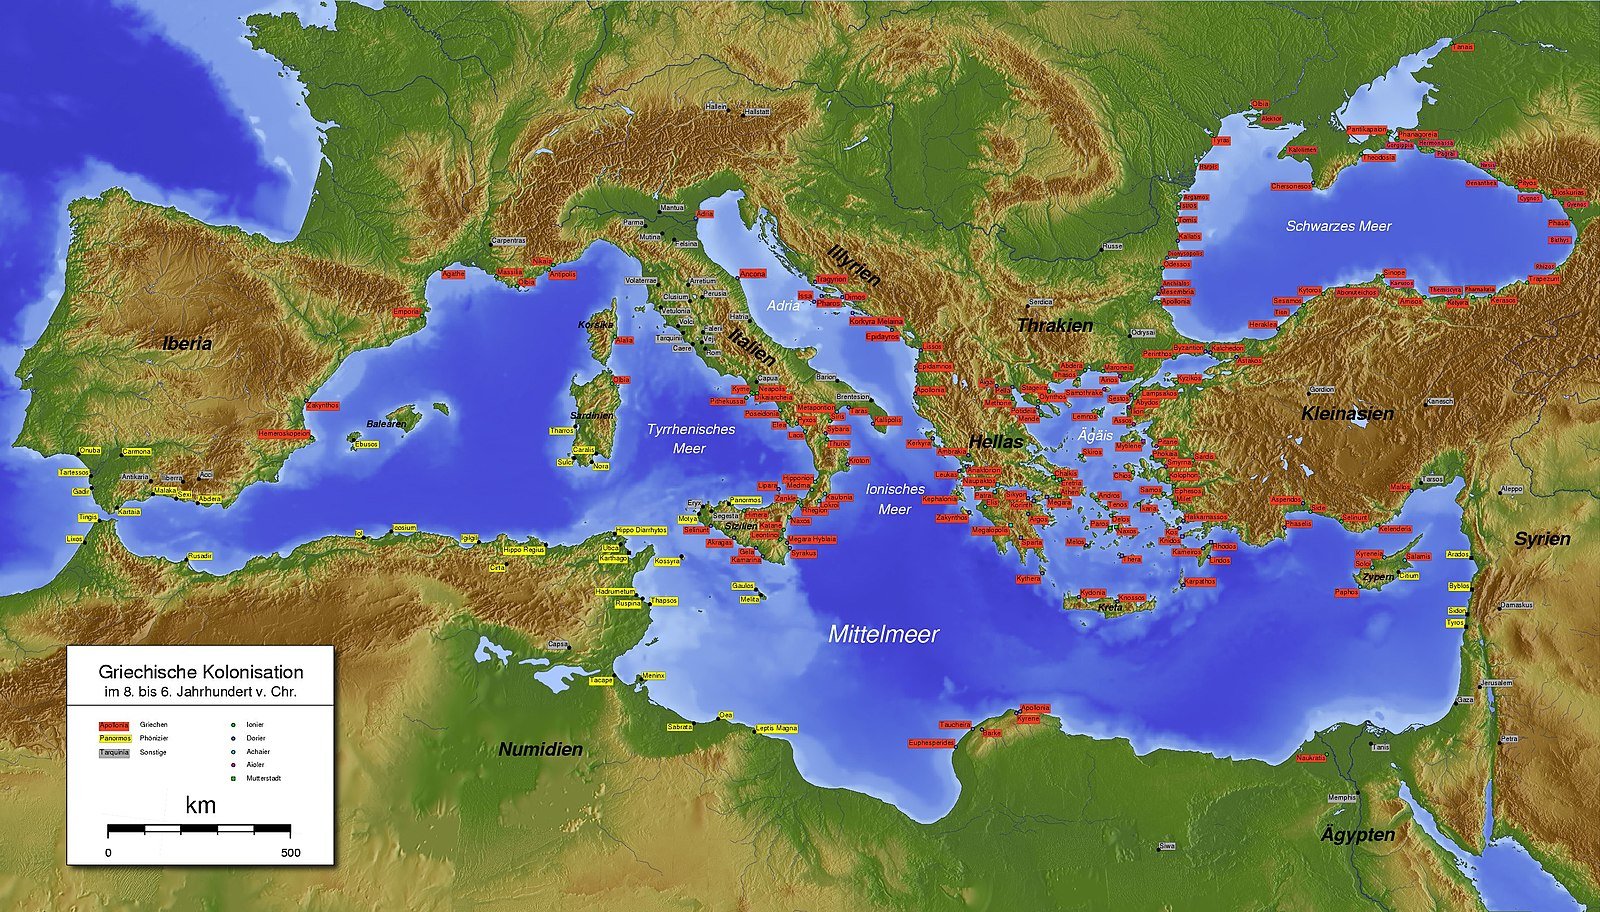 Greek Colonies in the Classical World including ancient Greek city of Syracuse